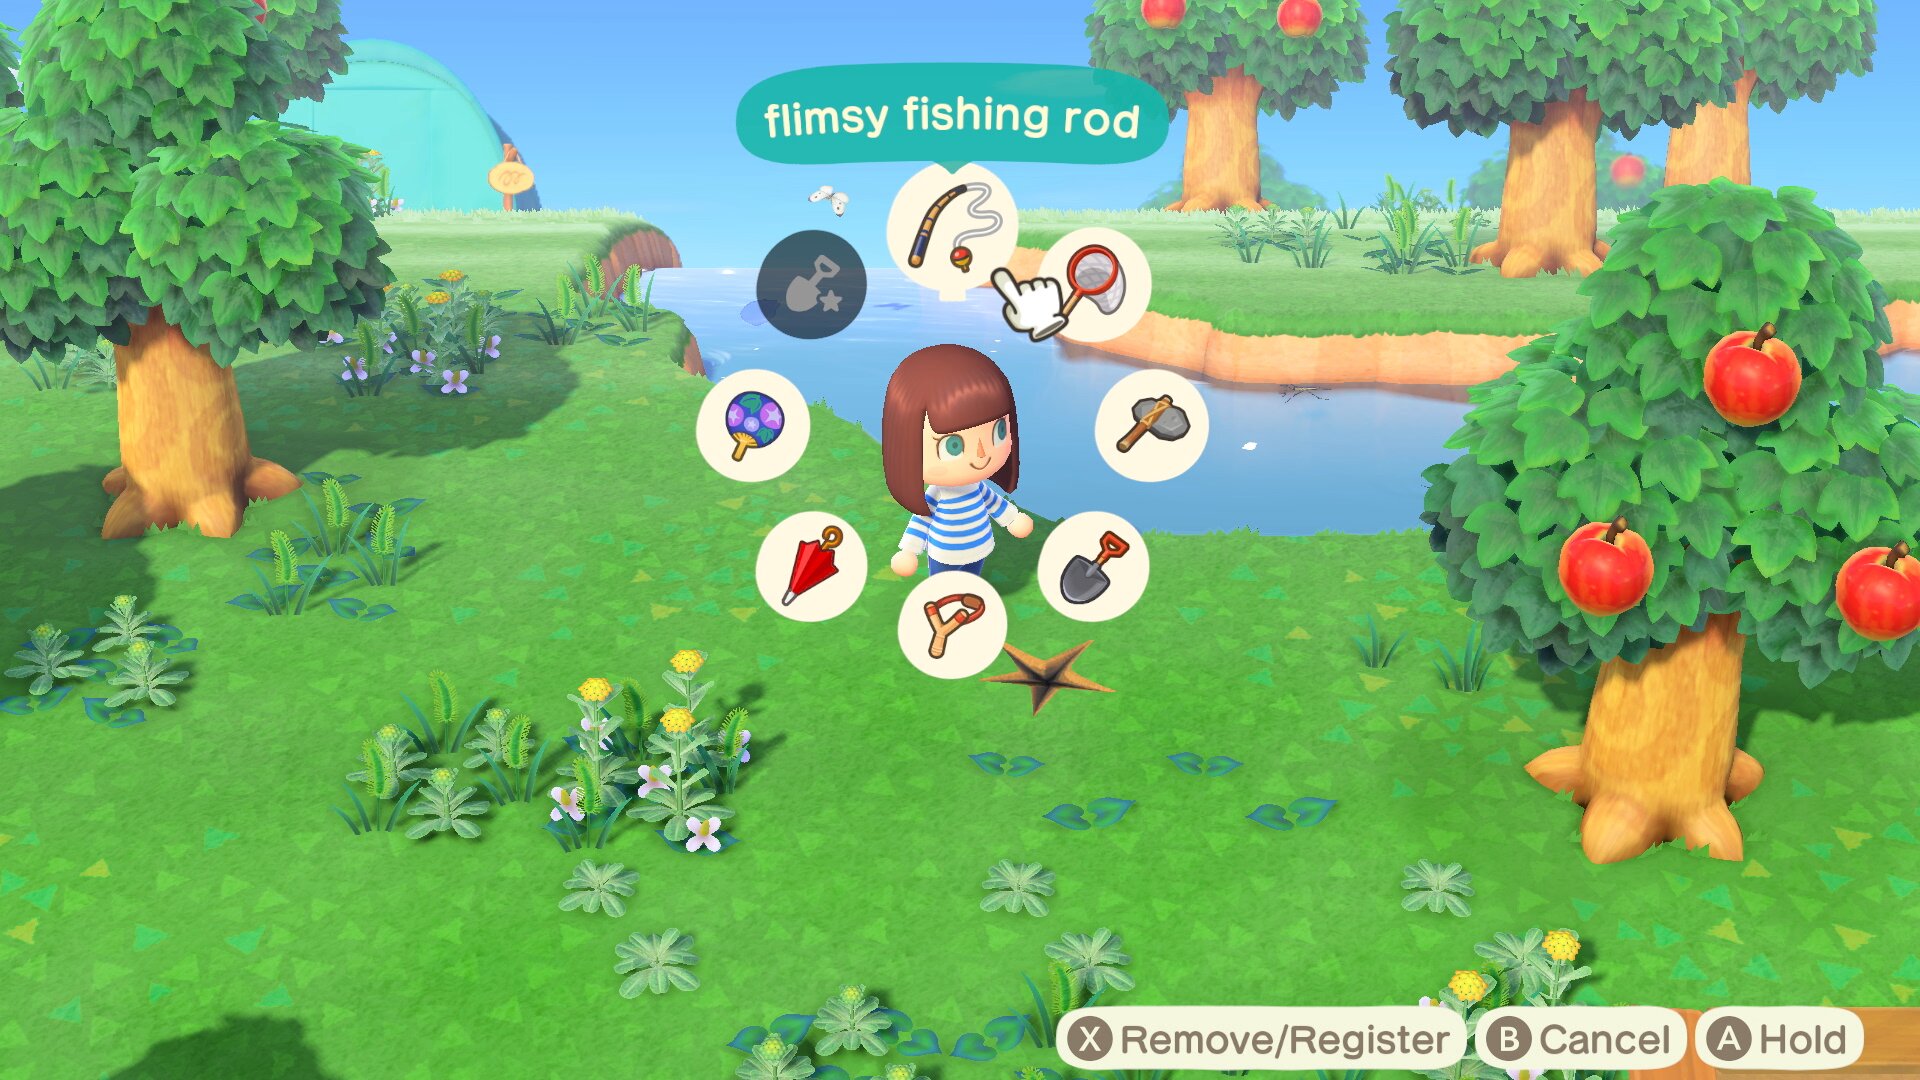 How to get golden tools in Animal Crossing: New Horizons